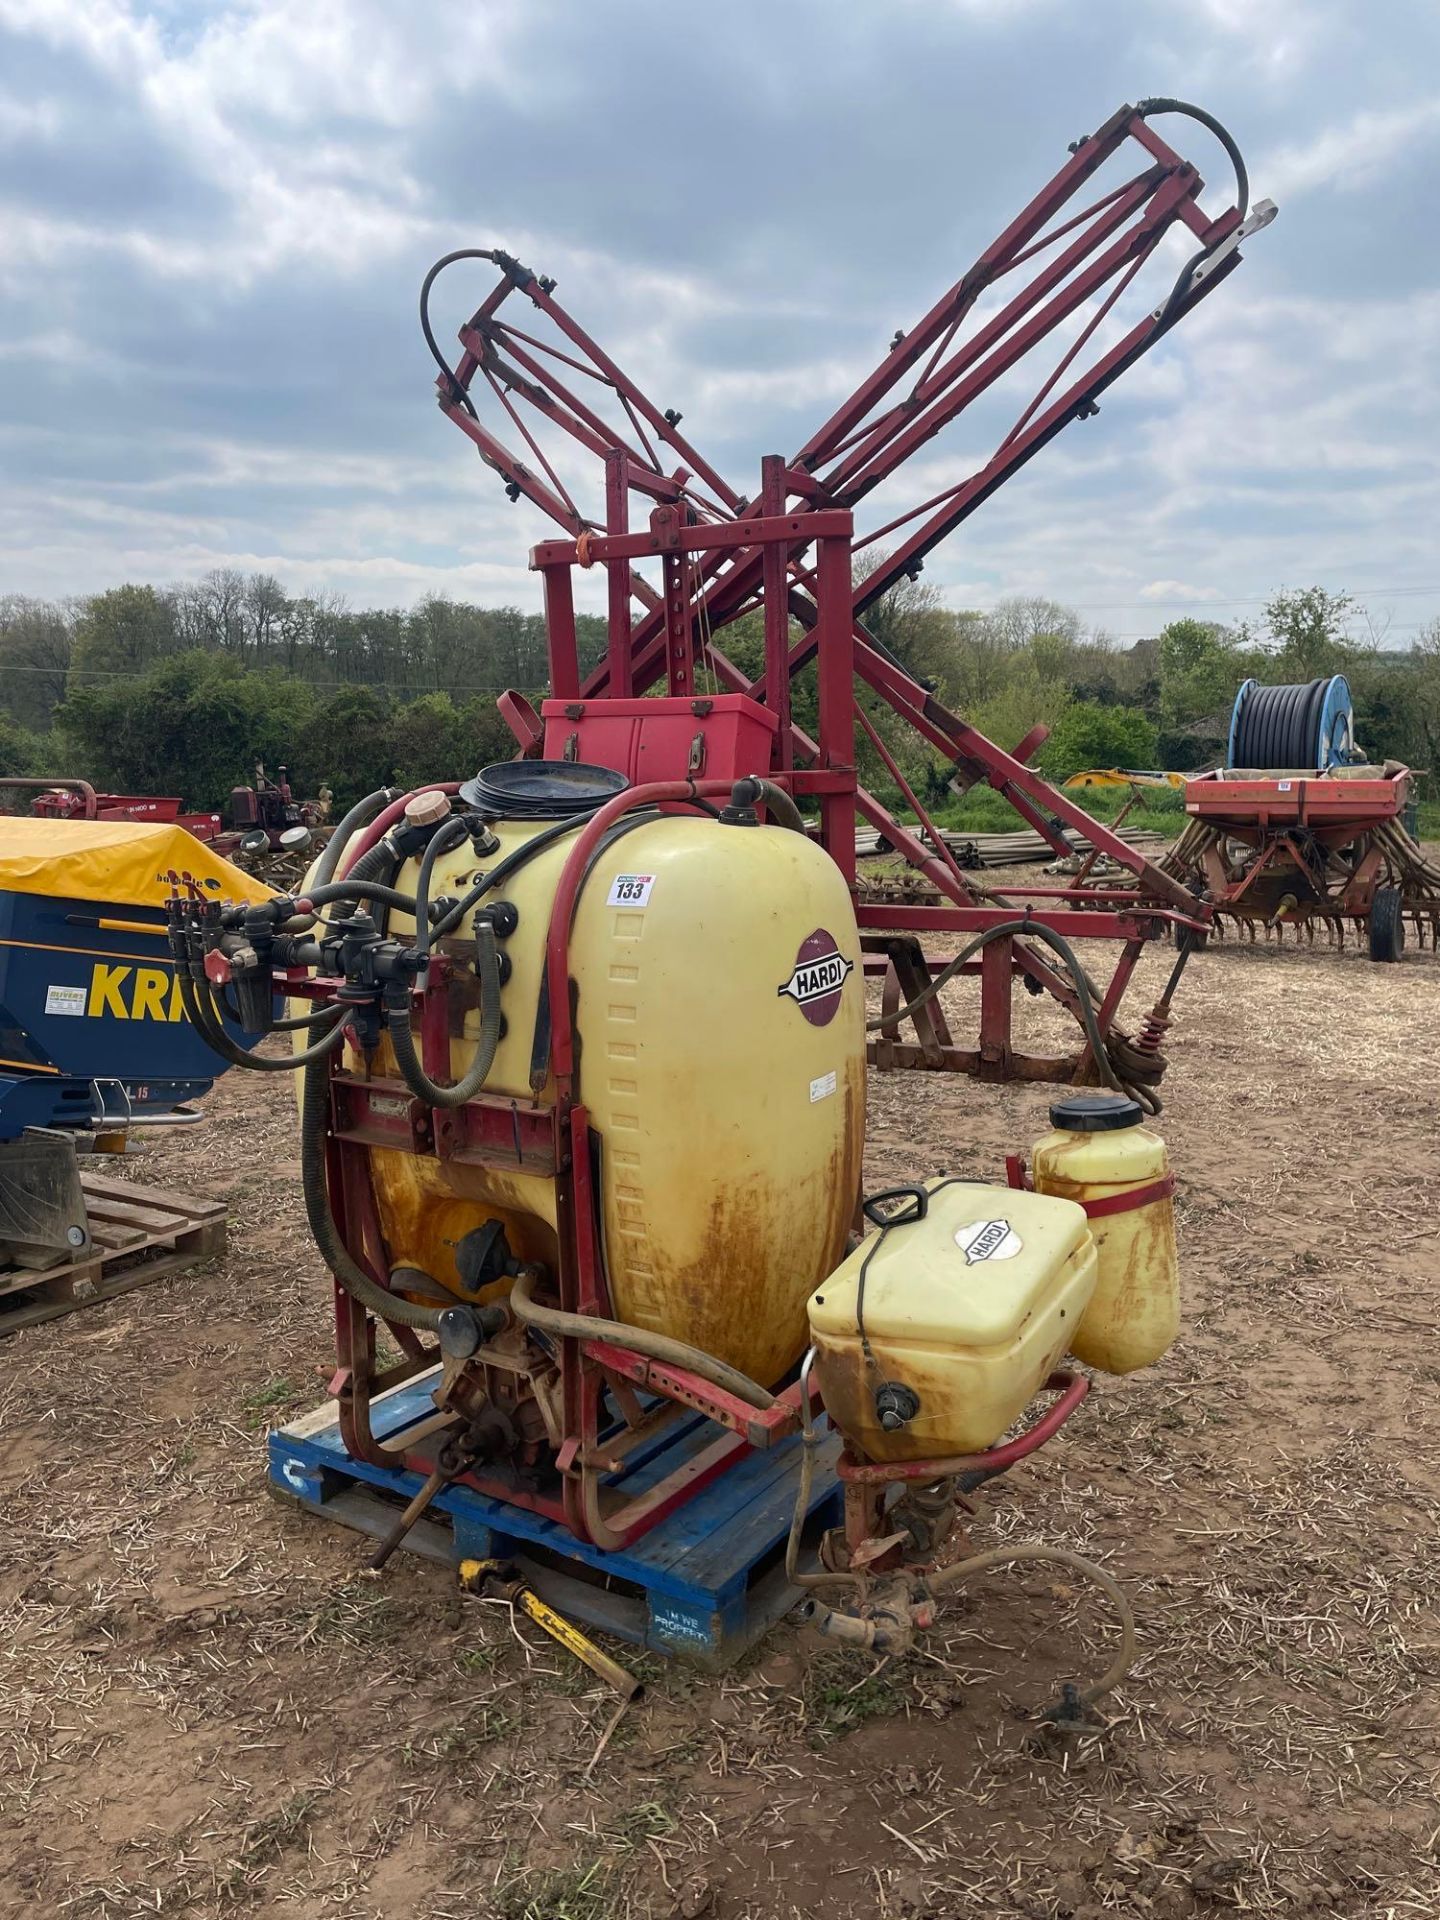 Hardi K600 12m linkage mounted sprayer with 600l tank, induction hopper and clean water tank with ma - Image 2 of 4